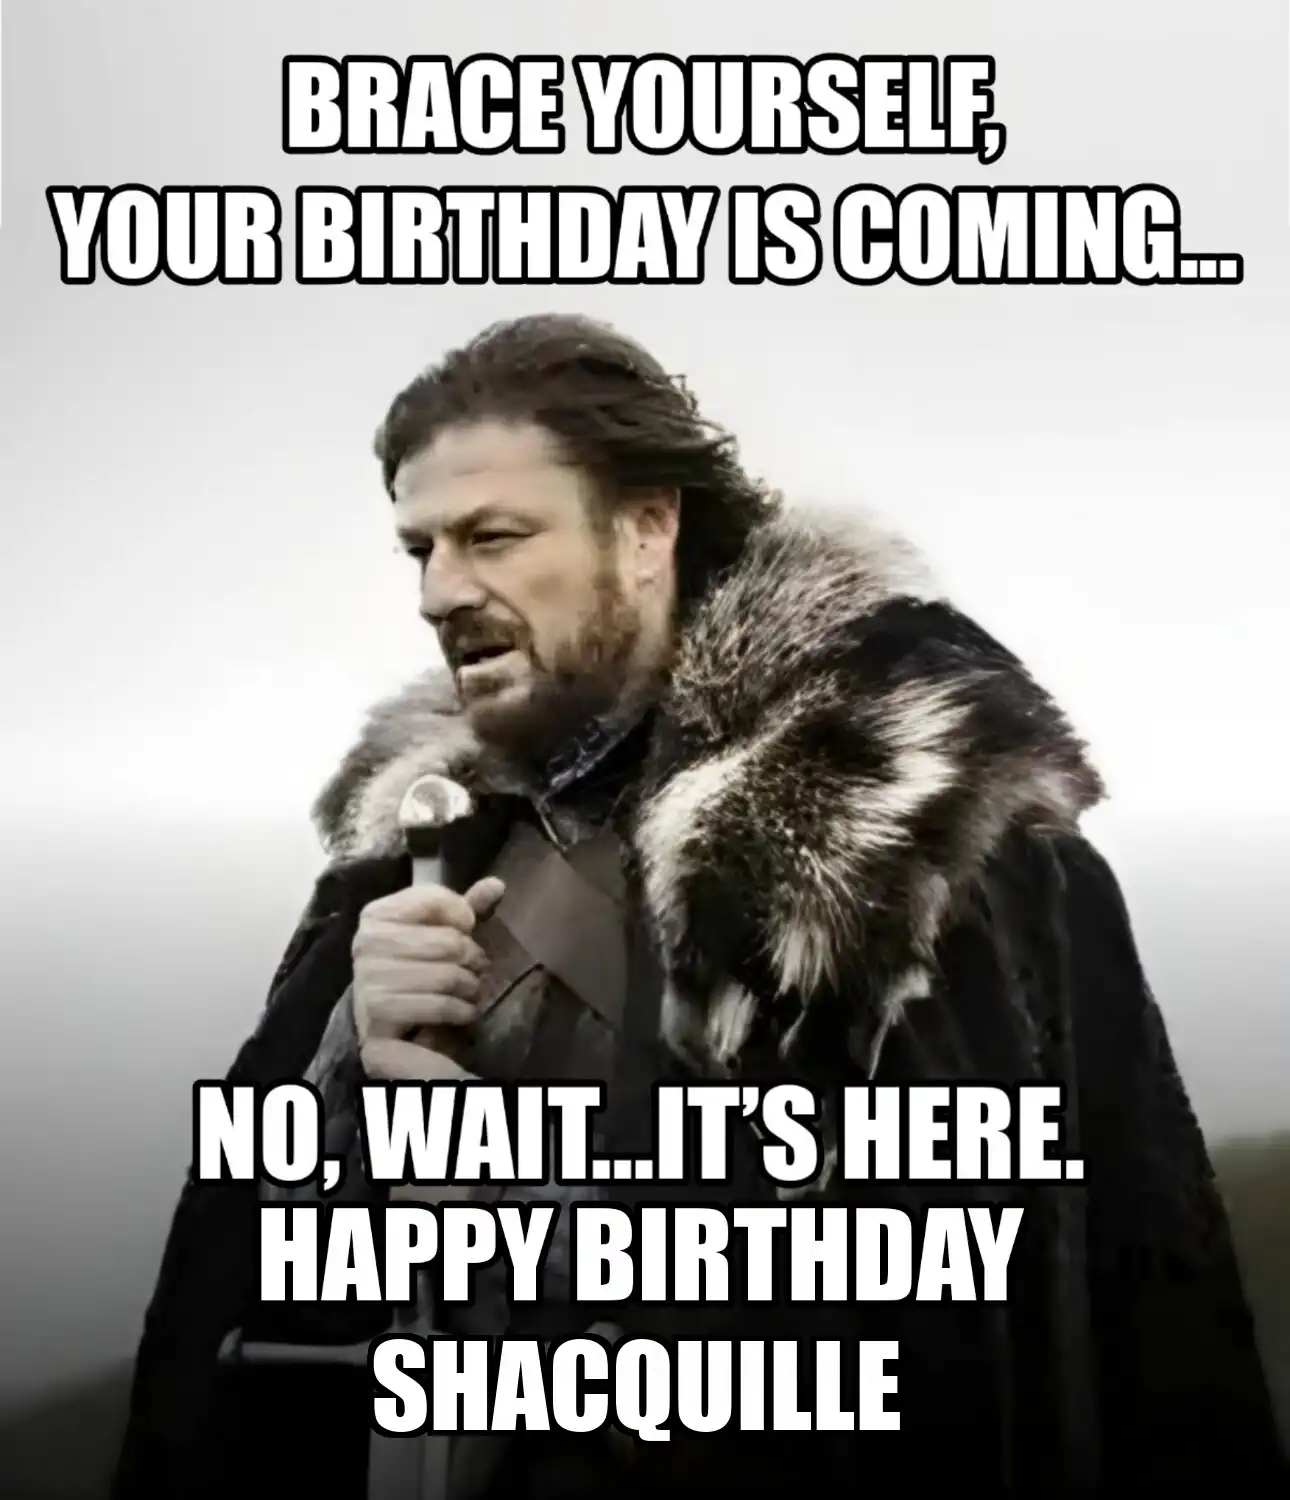 Happy Birthday Shacquille Brace Yourself Your Birthday Is Coming Meme